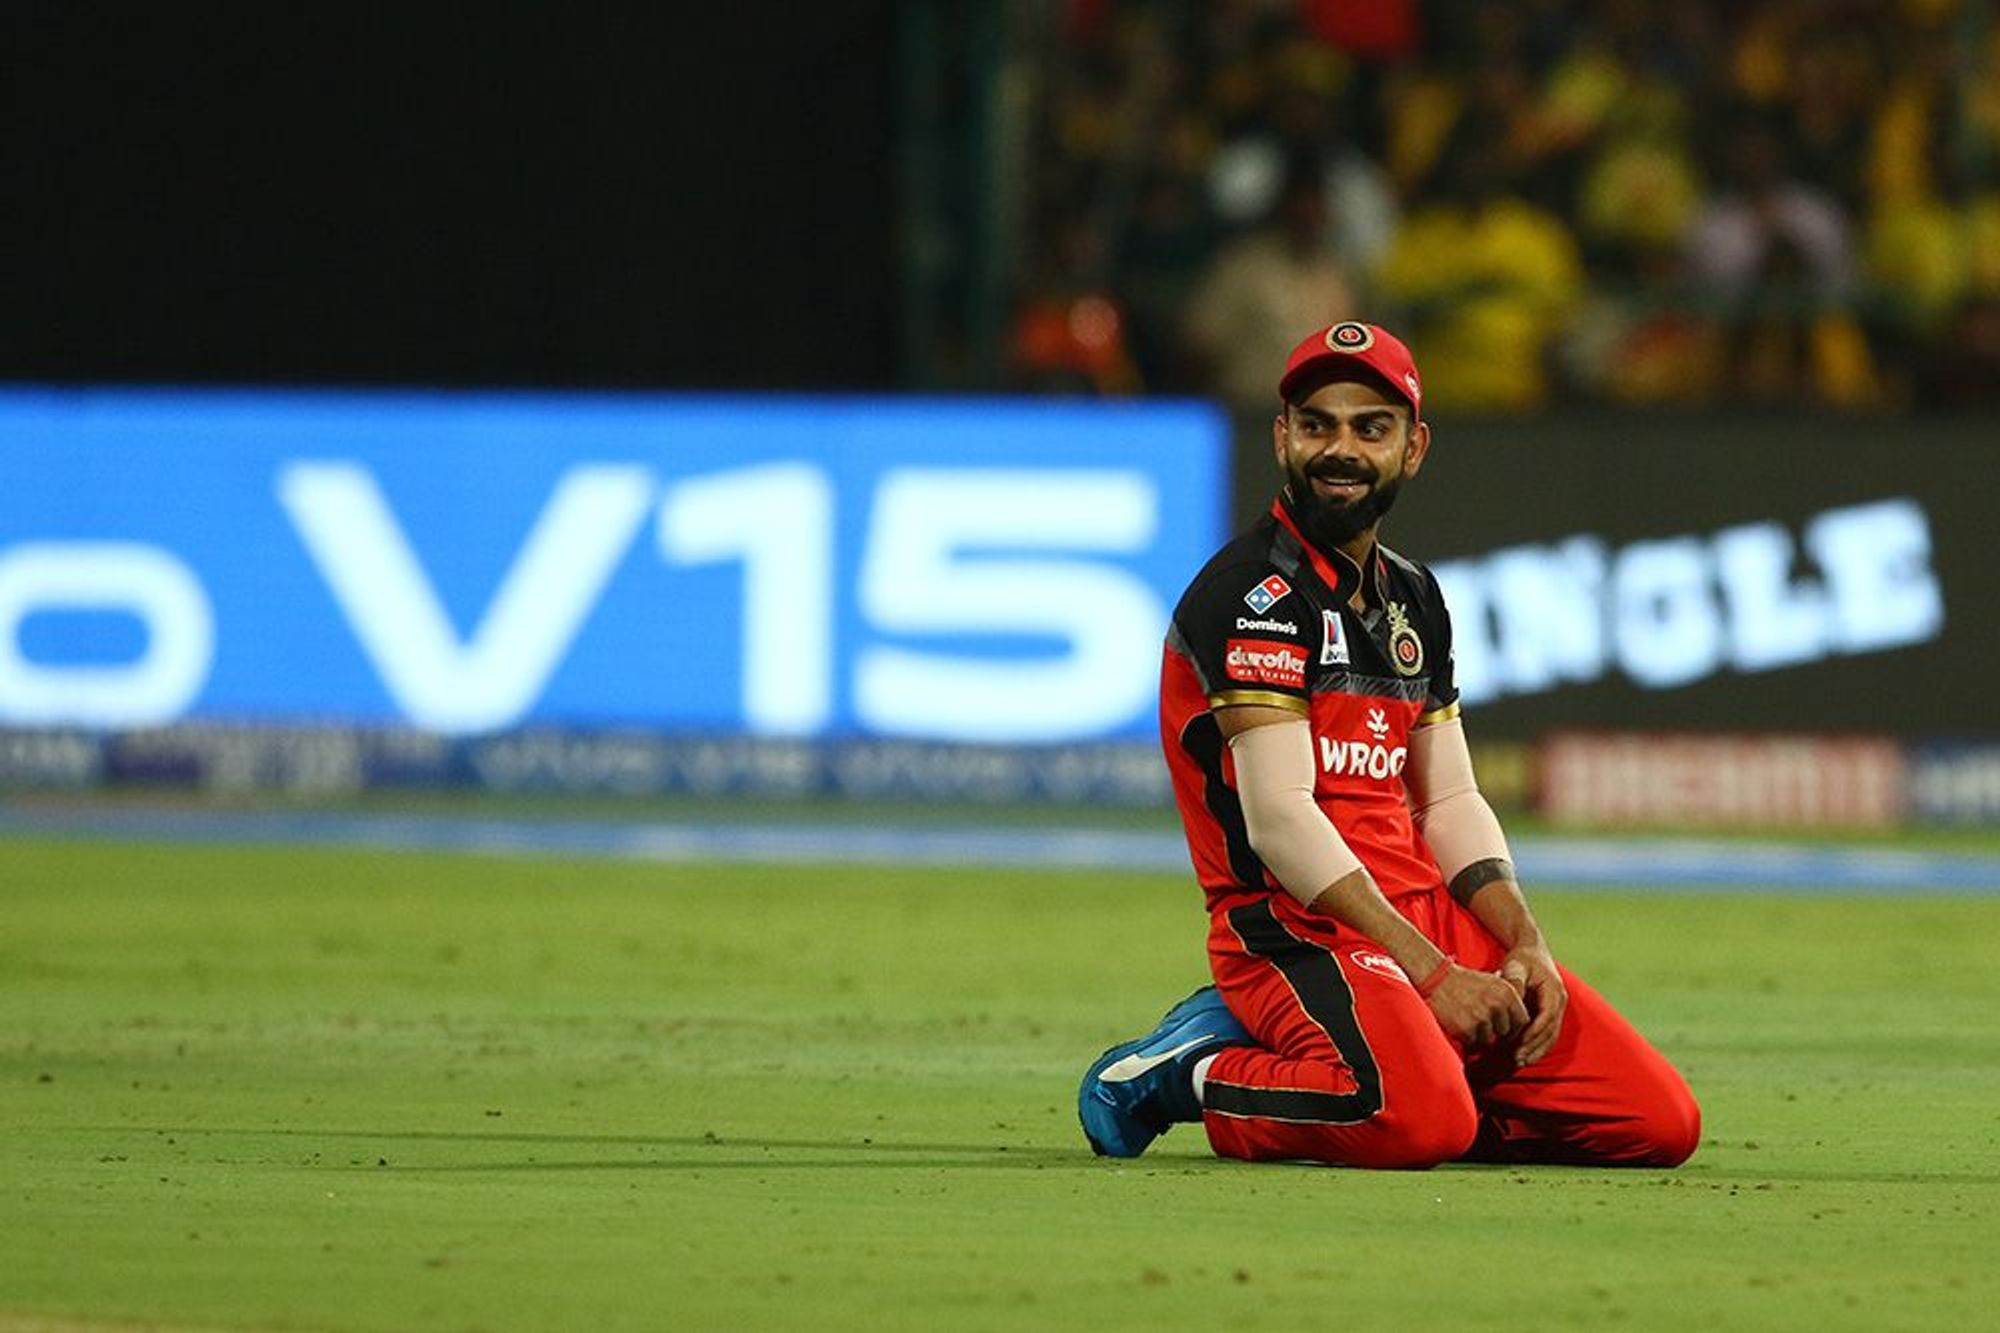 IPL 2020 | Virat Kohli is at his best weight at the moment, claims Shanker Basu